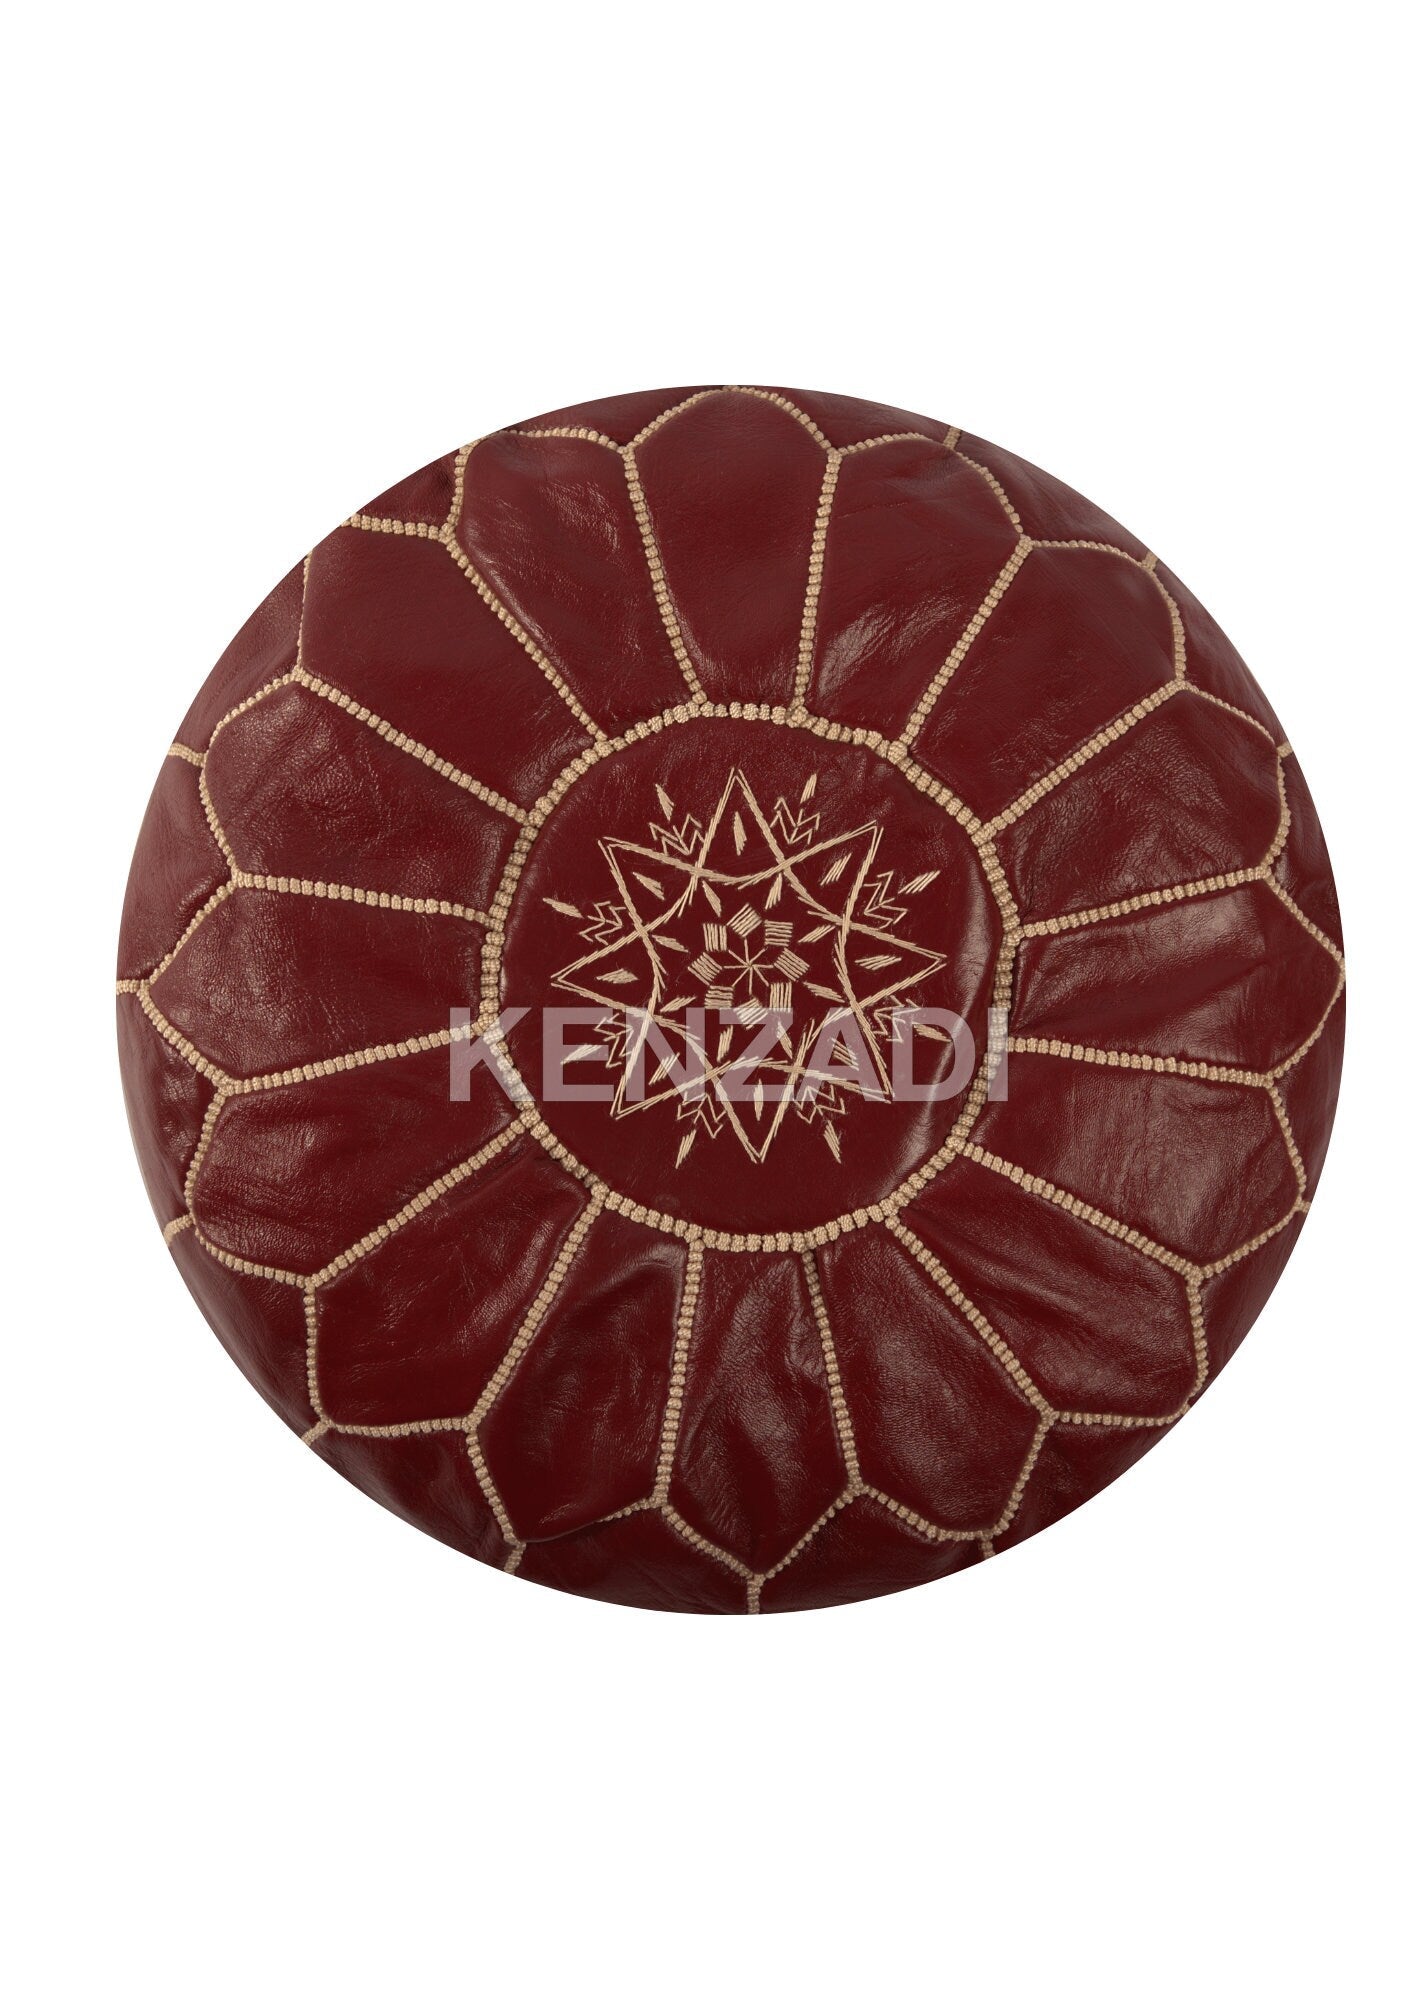 Handmade in premium Berber leather, this versatile pouf can be used as a footrest, pouf, or coffee table. Add a touch of bohemian style to your home with this unique and stylish piece